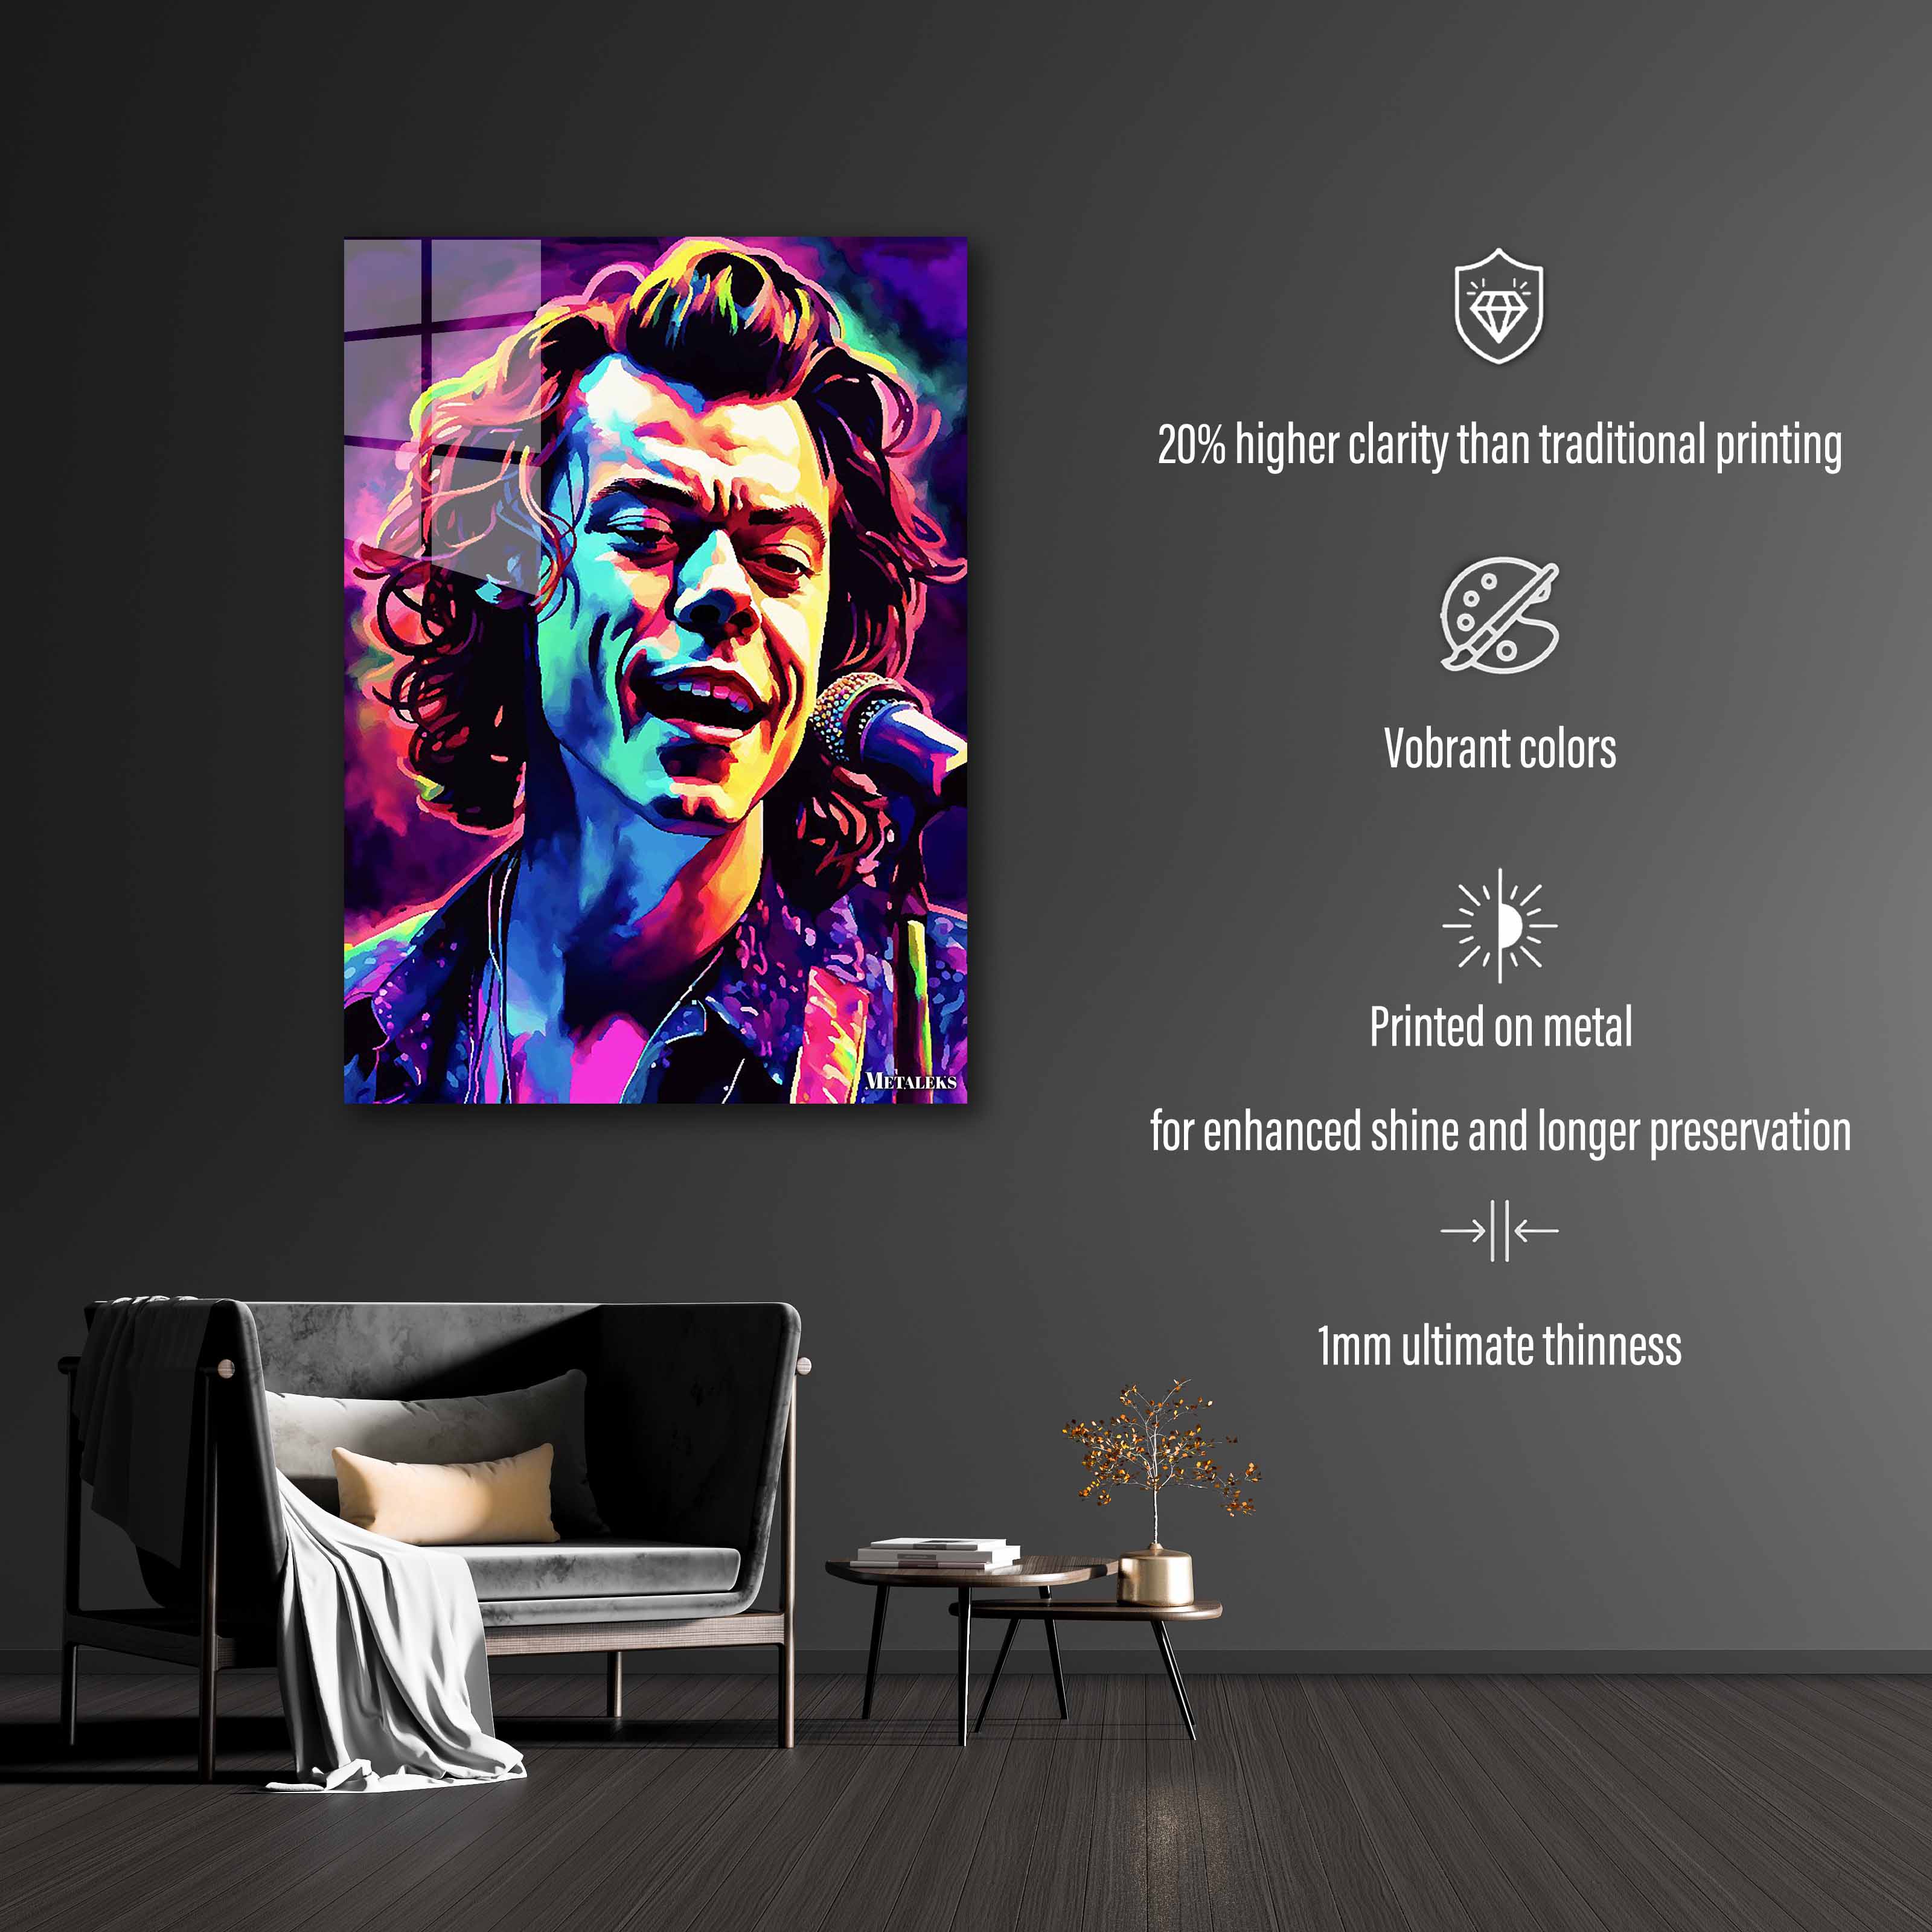 Harry Styles 1-designed by @ALTAY